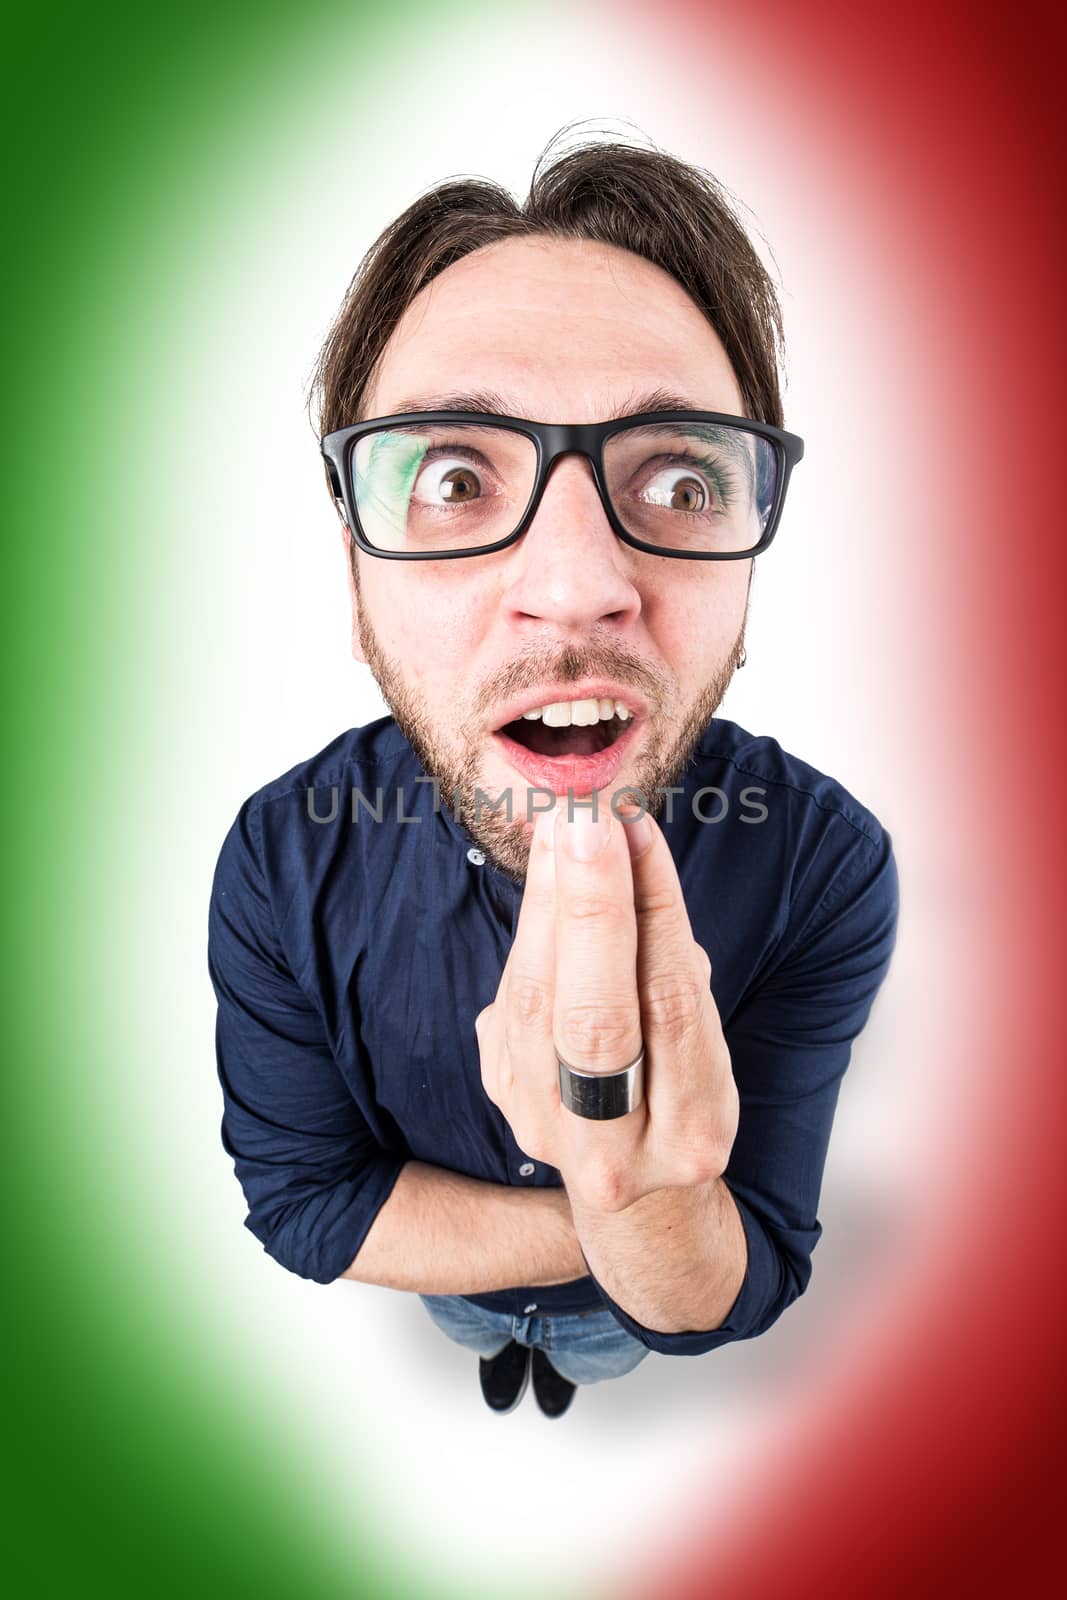 Funny man doing typical Italian hand gesture meaning a general question